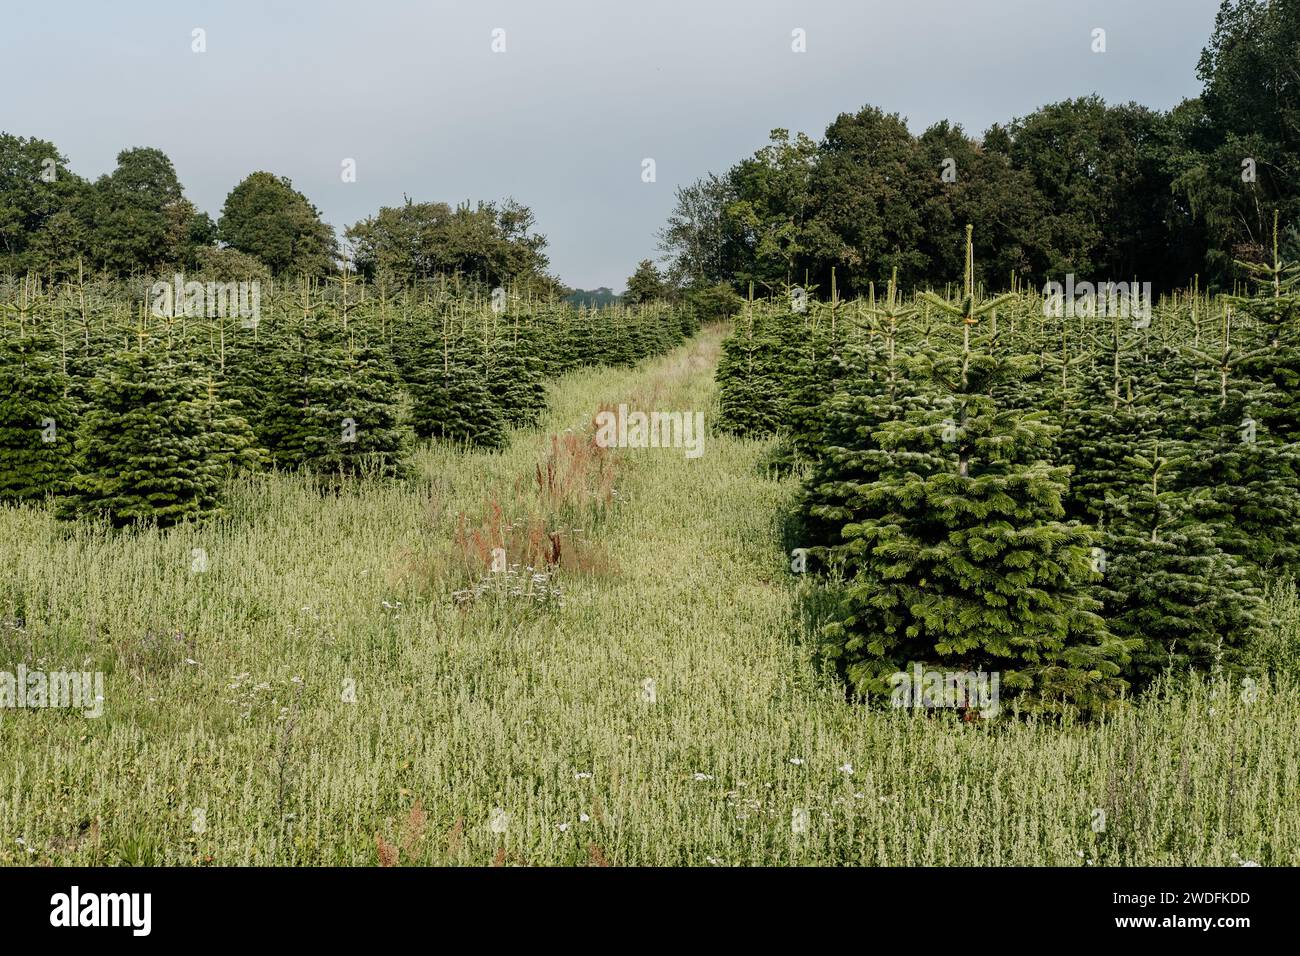 Christmas tree cultivation. Rows of pine trees growing in the field Stock Photo